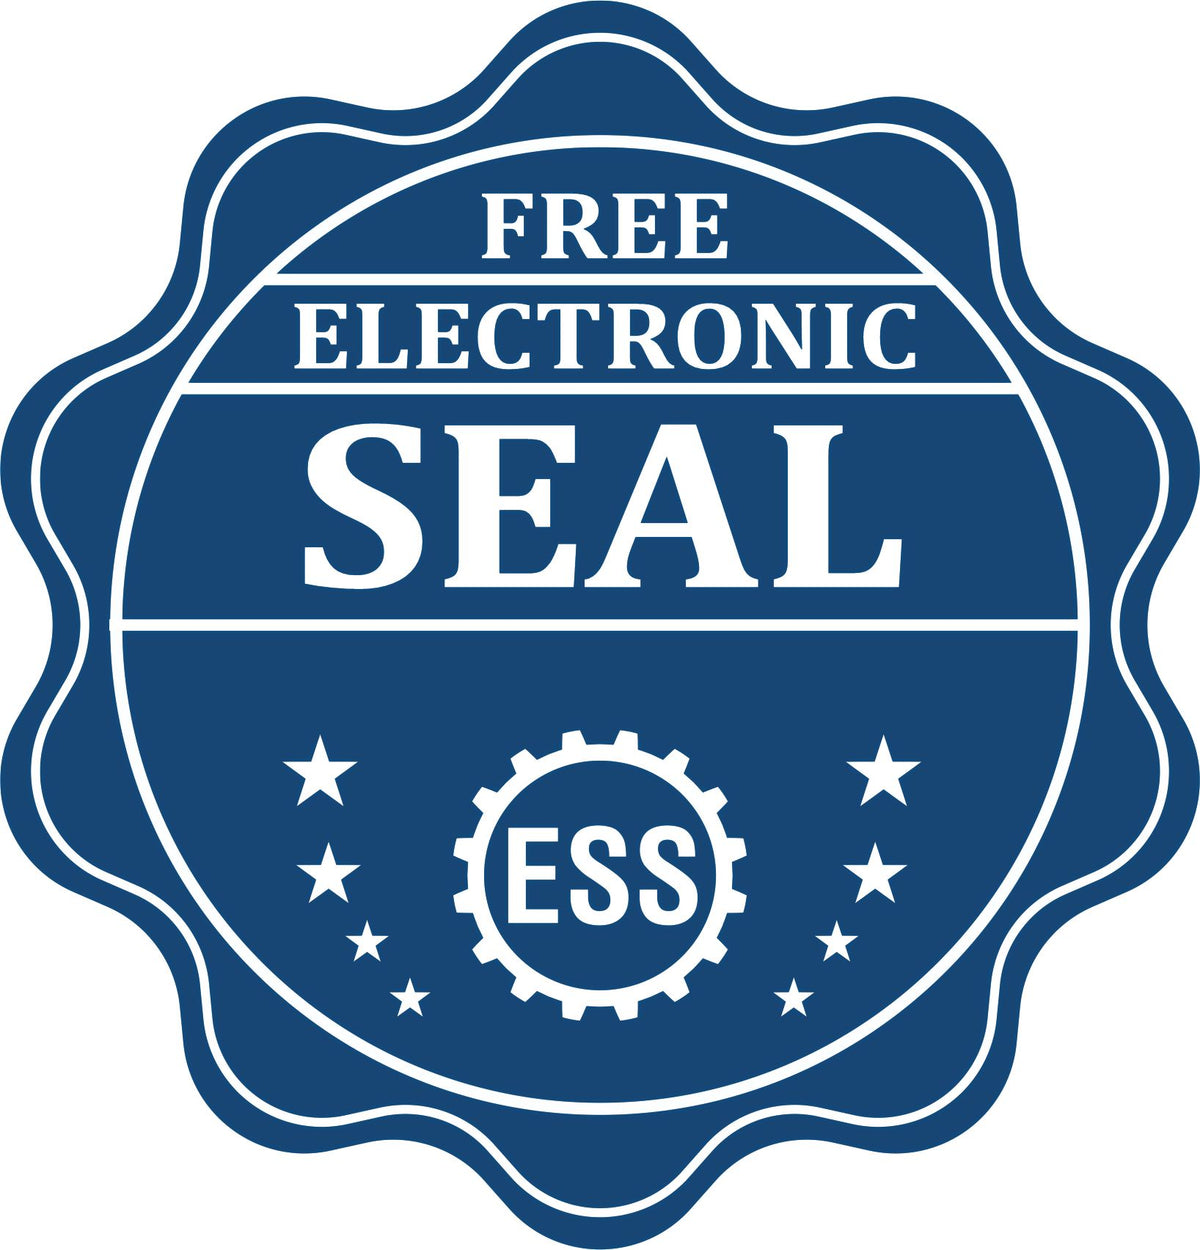 A badge showing a free electronic seal for the Slim Pre-Inked Vermont Landscape Architect Seal Stamp with stars and the ESS gear on the emblem.